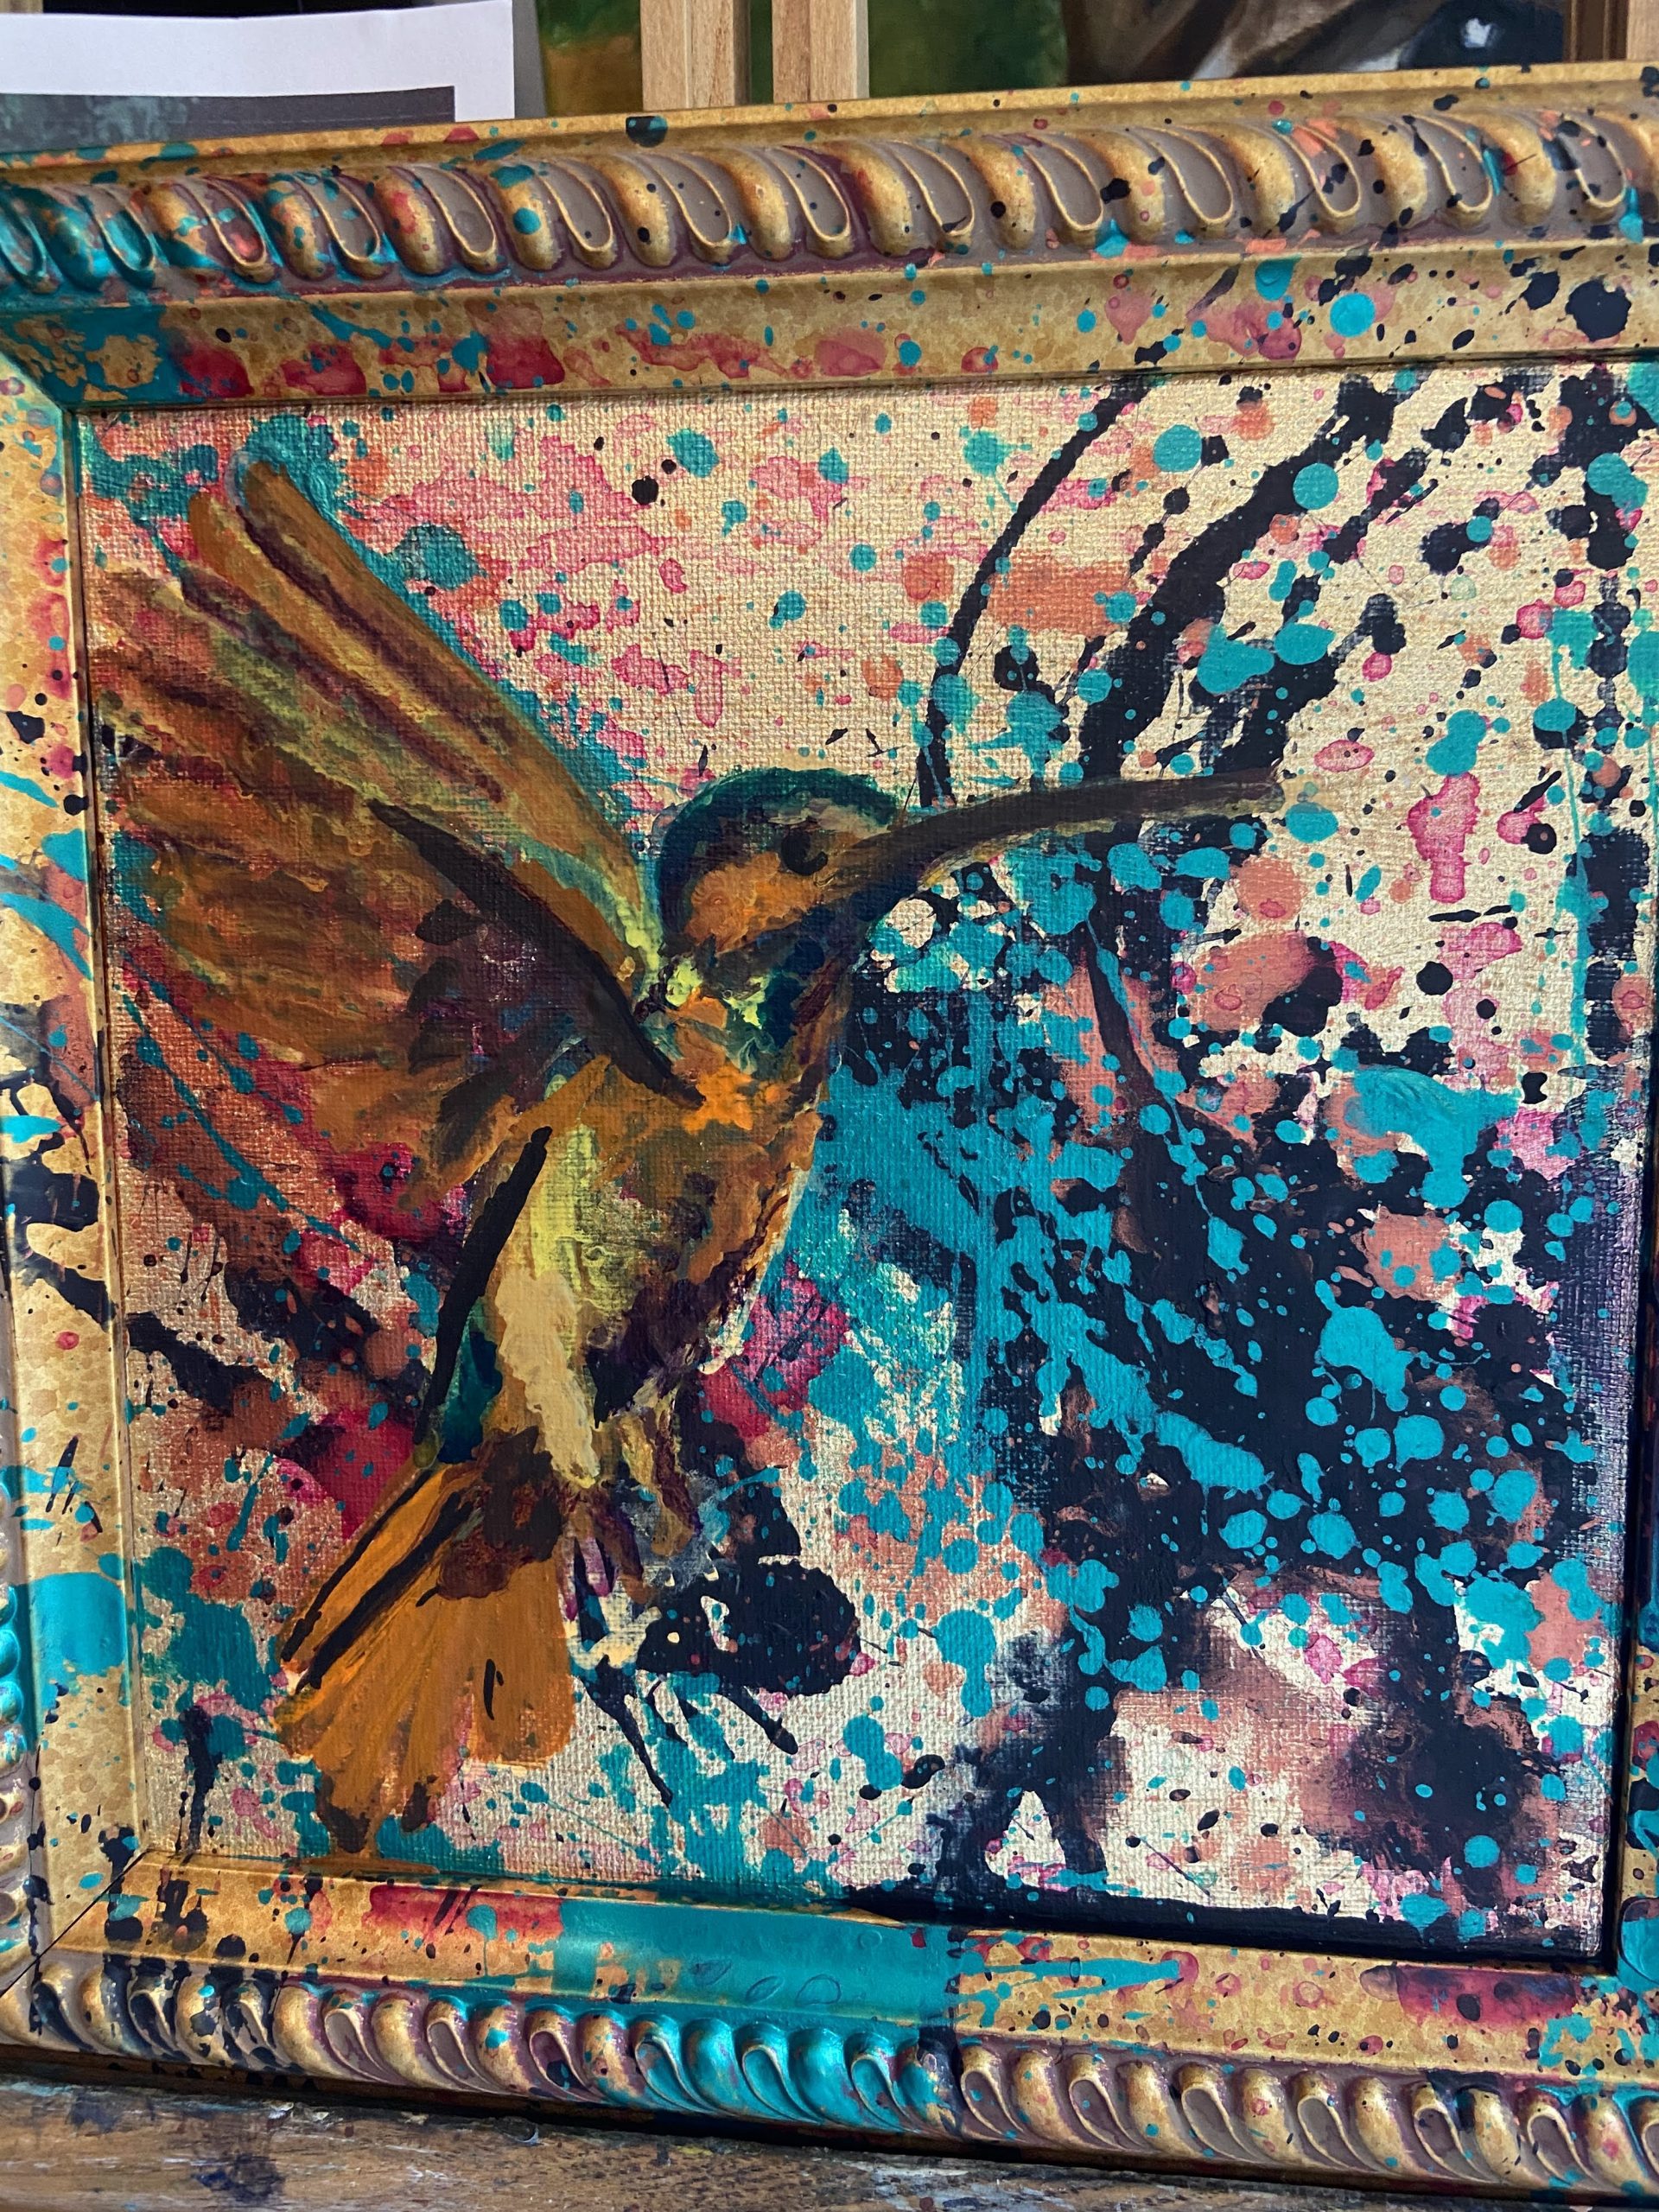 Hummingbird painted with acrylics on a splattered gold leaf canvas